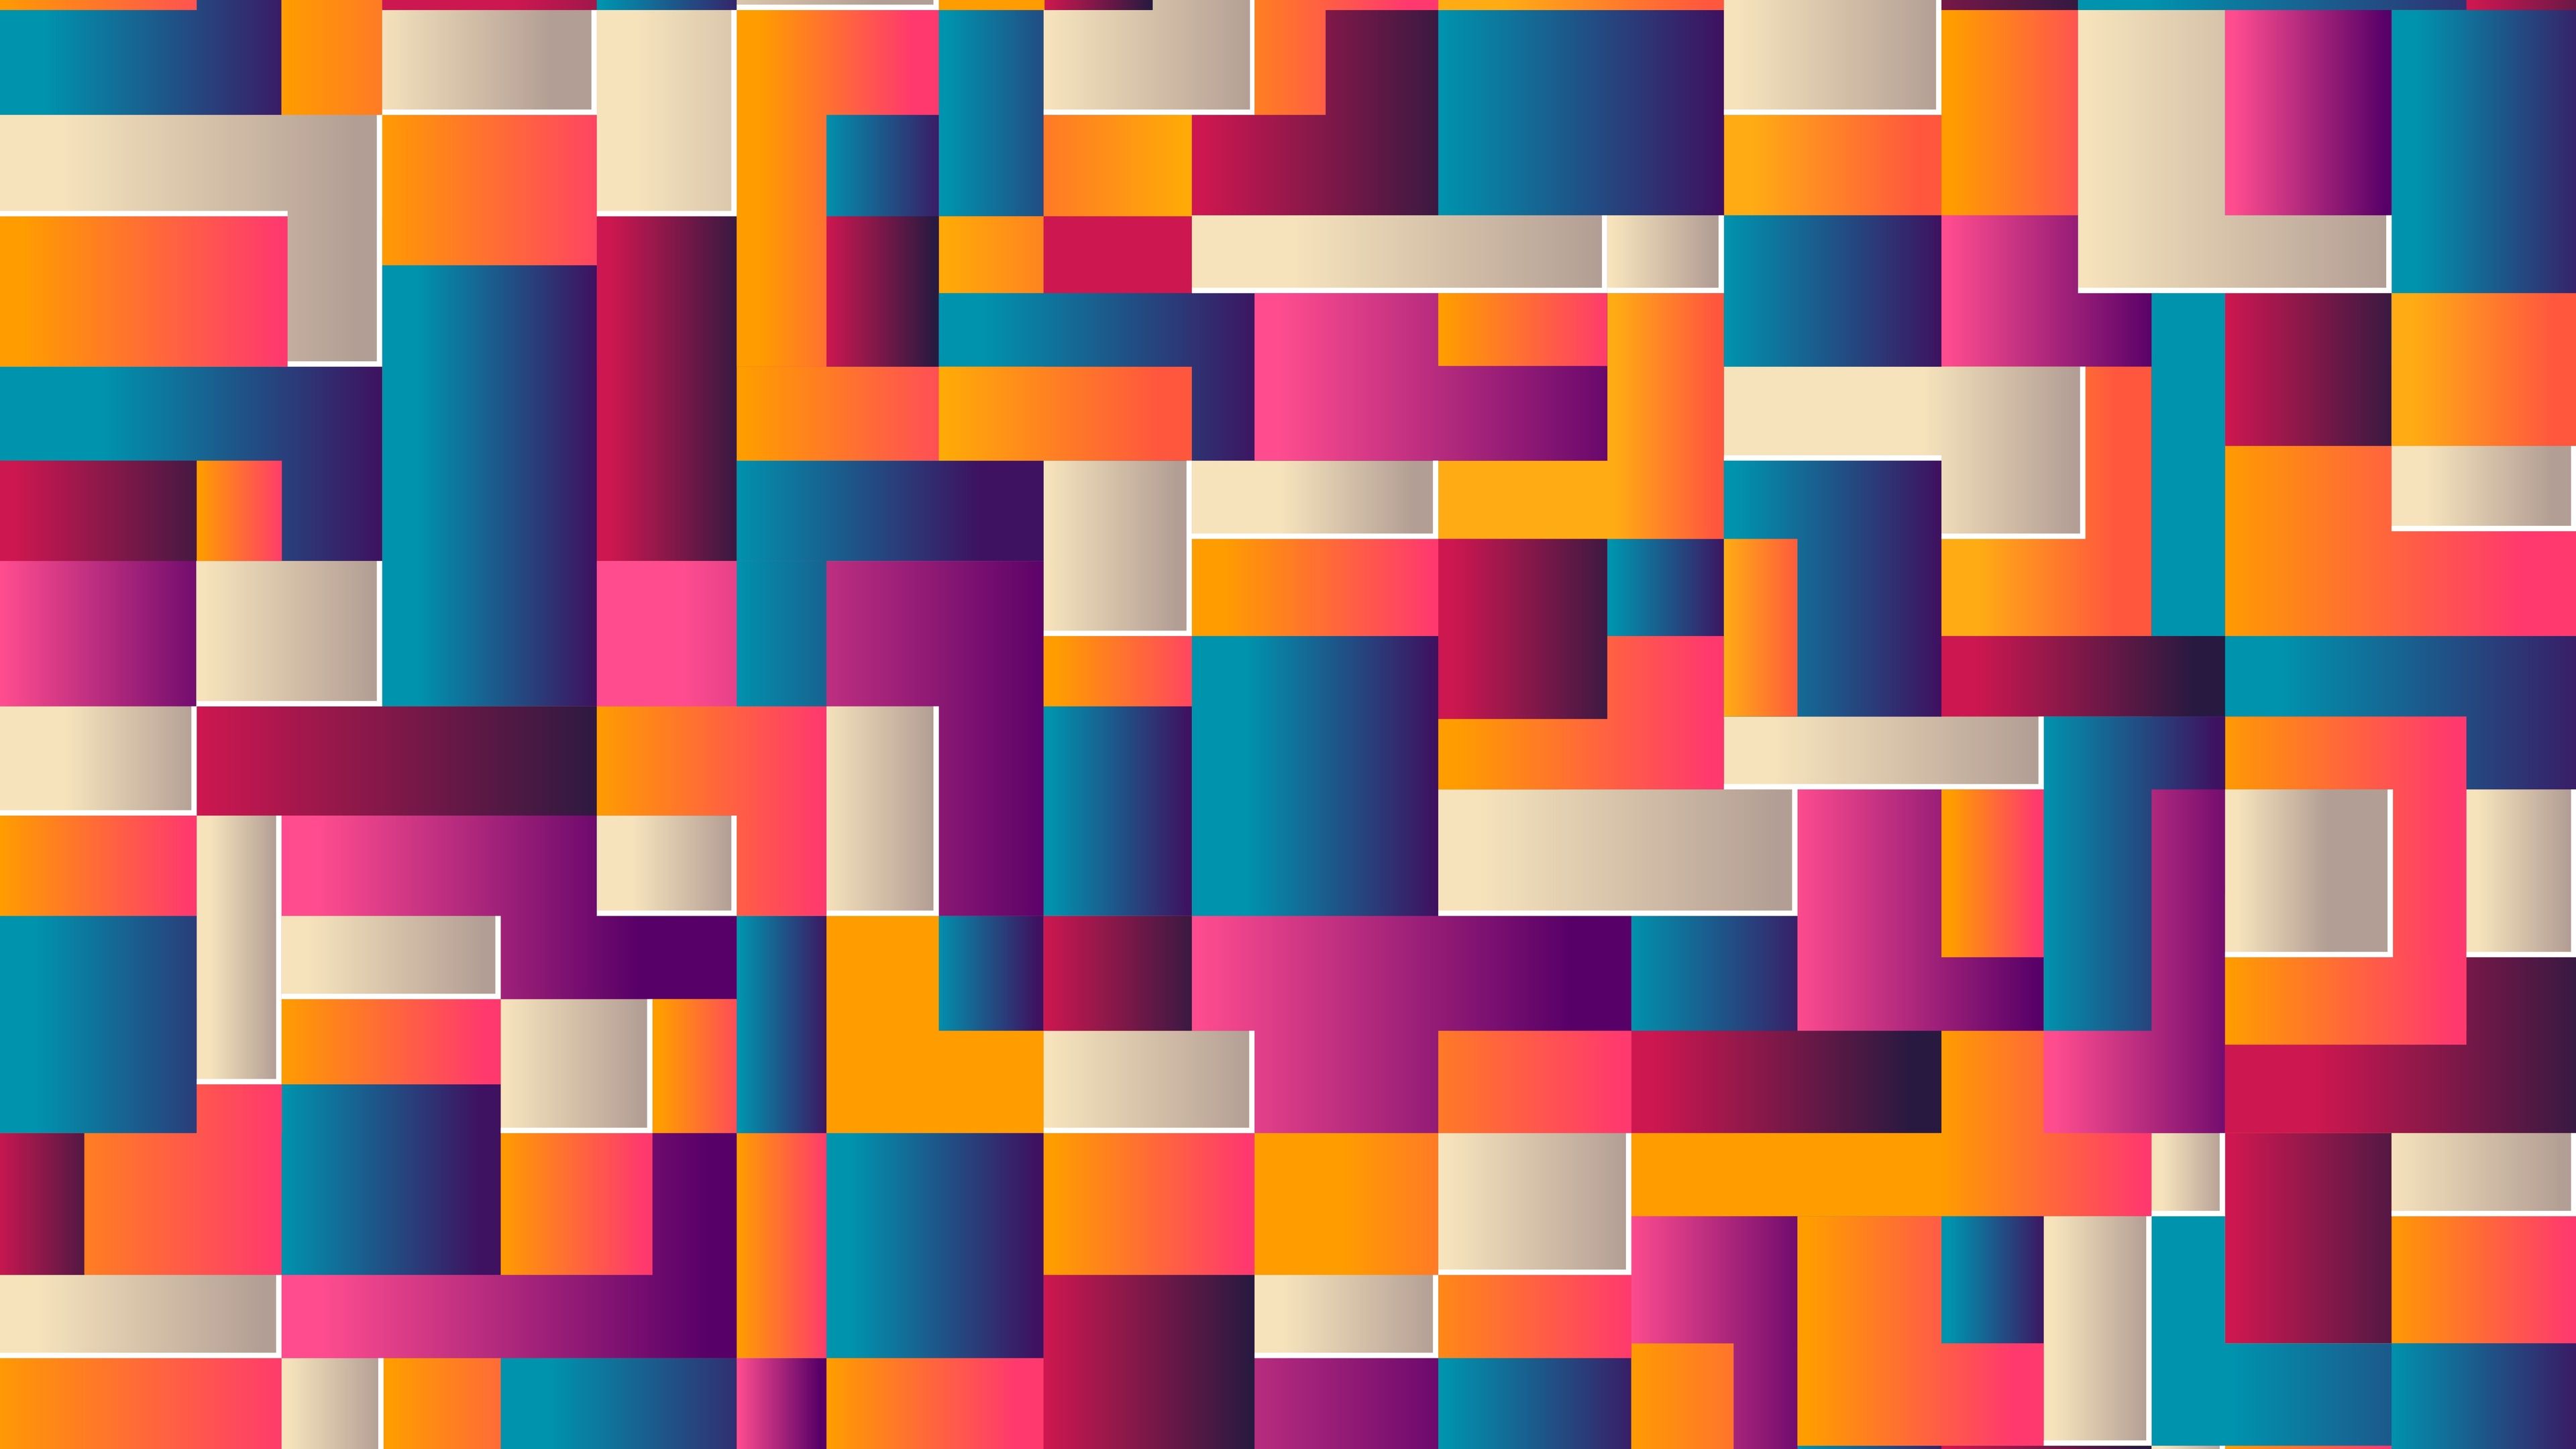 Colorful Shapes Abstract Shapes Wallpaper, Hd Wallpaper, Colorful Wallpaper, Abstract Wallpaper, 5k. Abstract Wallpaper, Colorful Wallpaper, Graphic Wallpaper